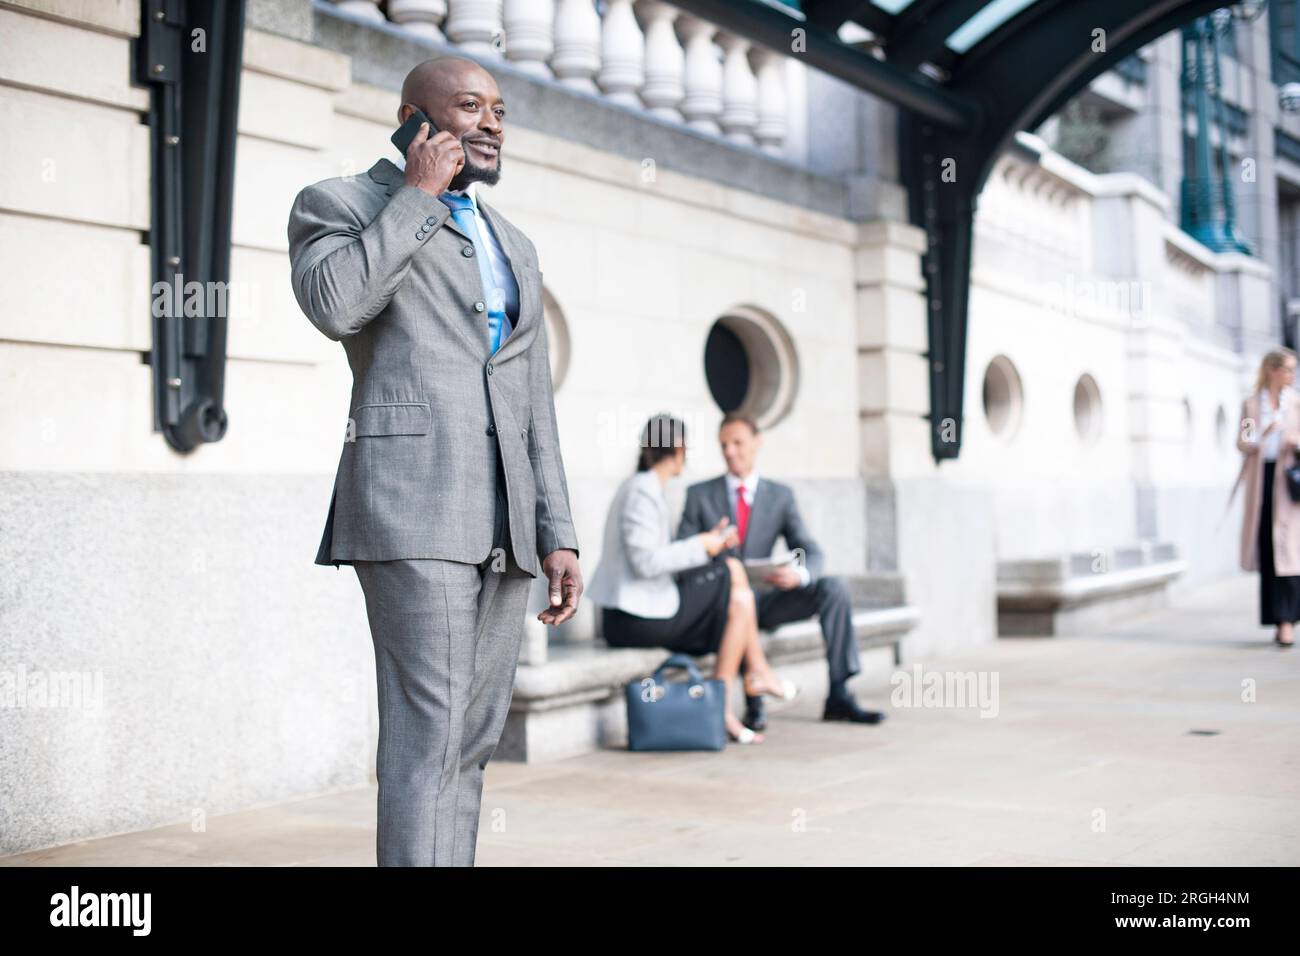 Businessman on phone at bus stop Stock Photo